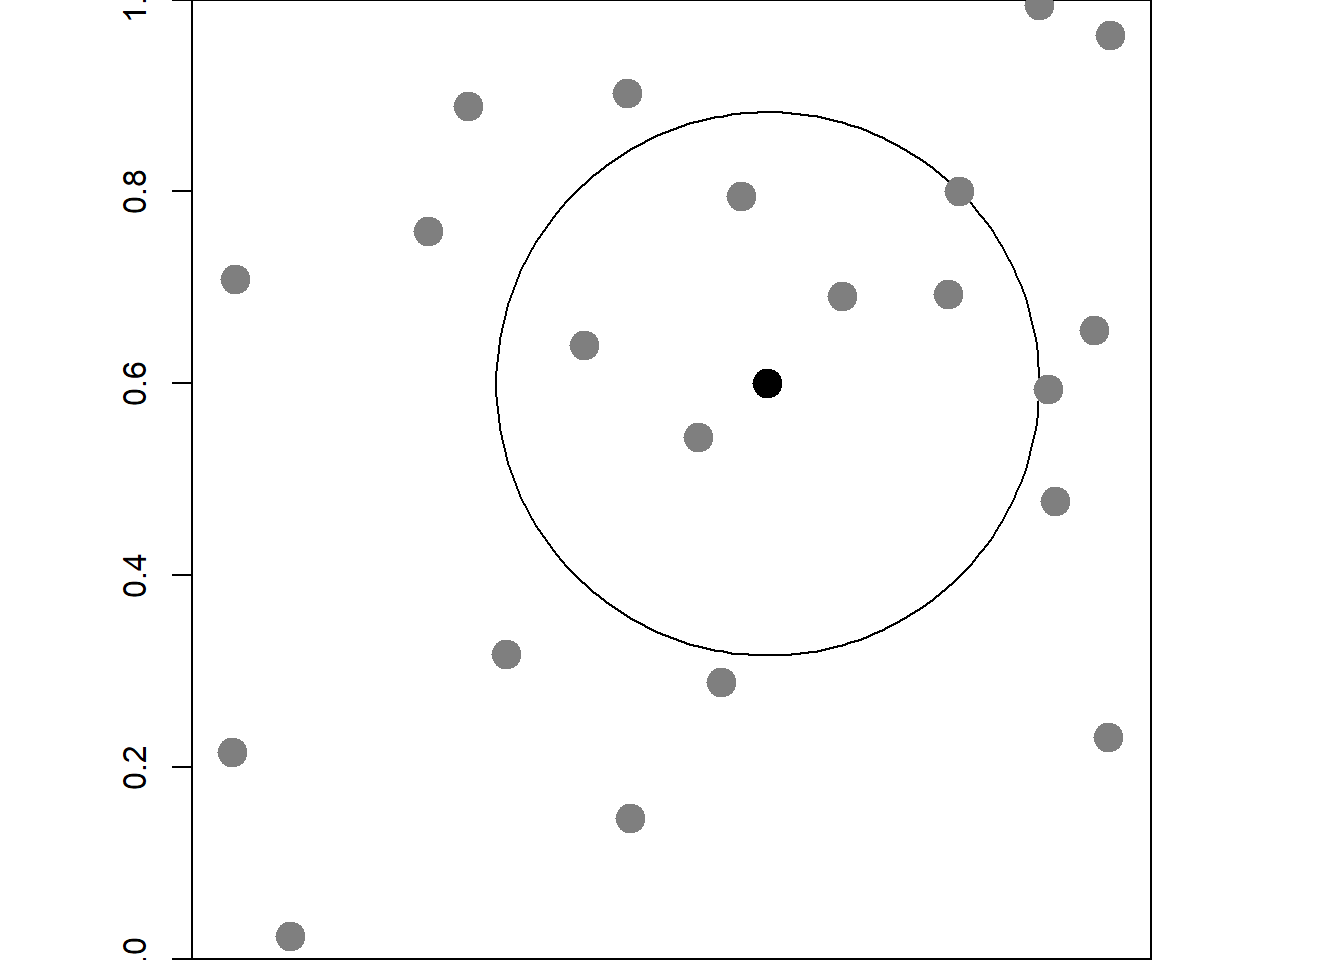 Left: Point pattern in the unit square region. The black point represents an arbitrary event. The circle encloses the events considered to estimate the K-function at the distance given by the radius of the circle. Right: Gray area represents the inverse of the weight used in the estimation of the K-function using the $x_i$ and $x_j$ events.